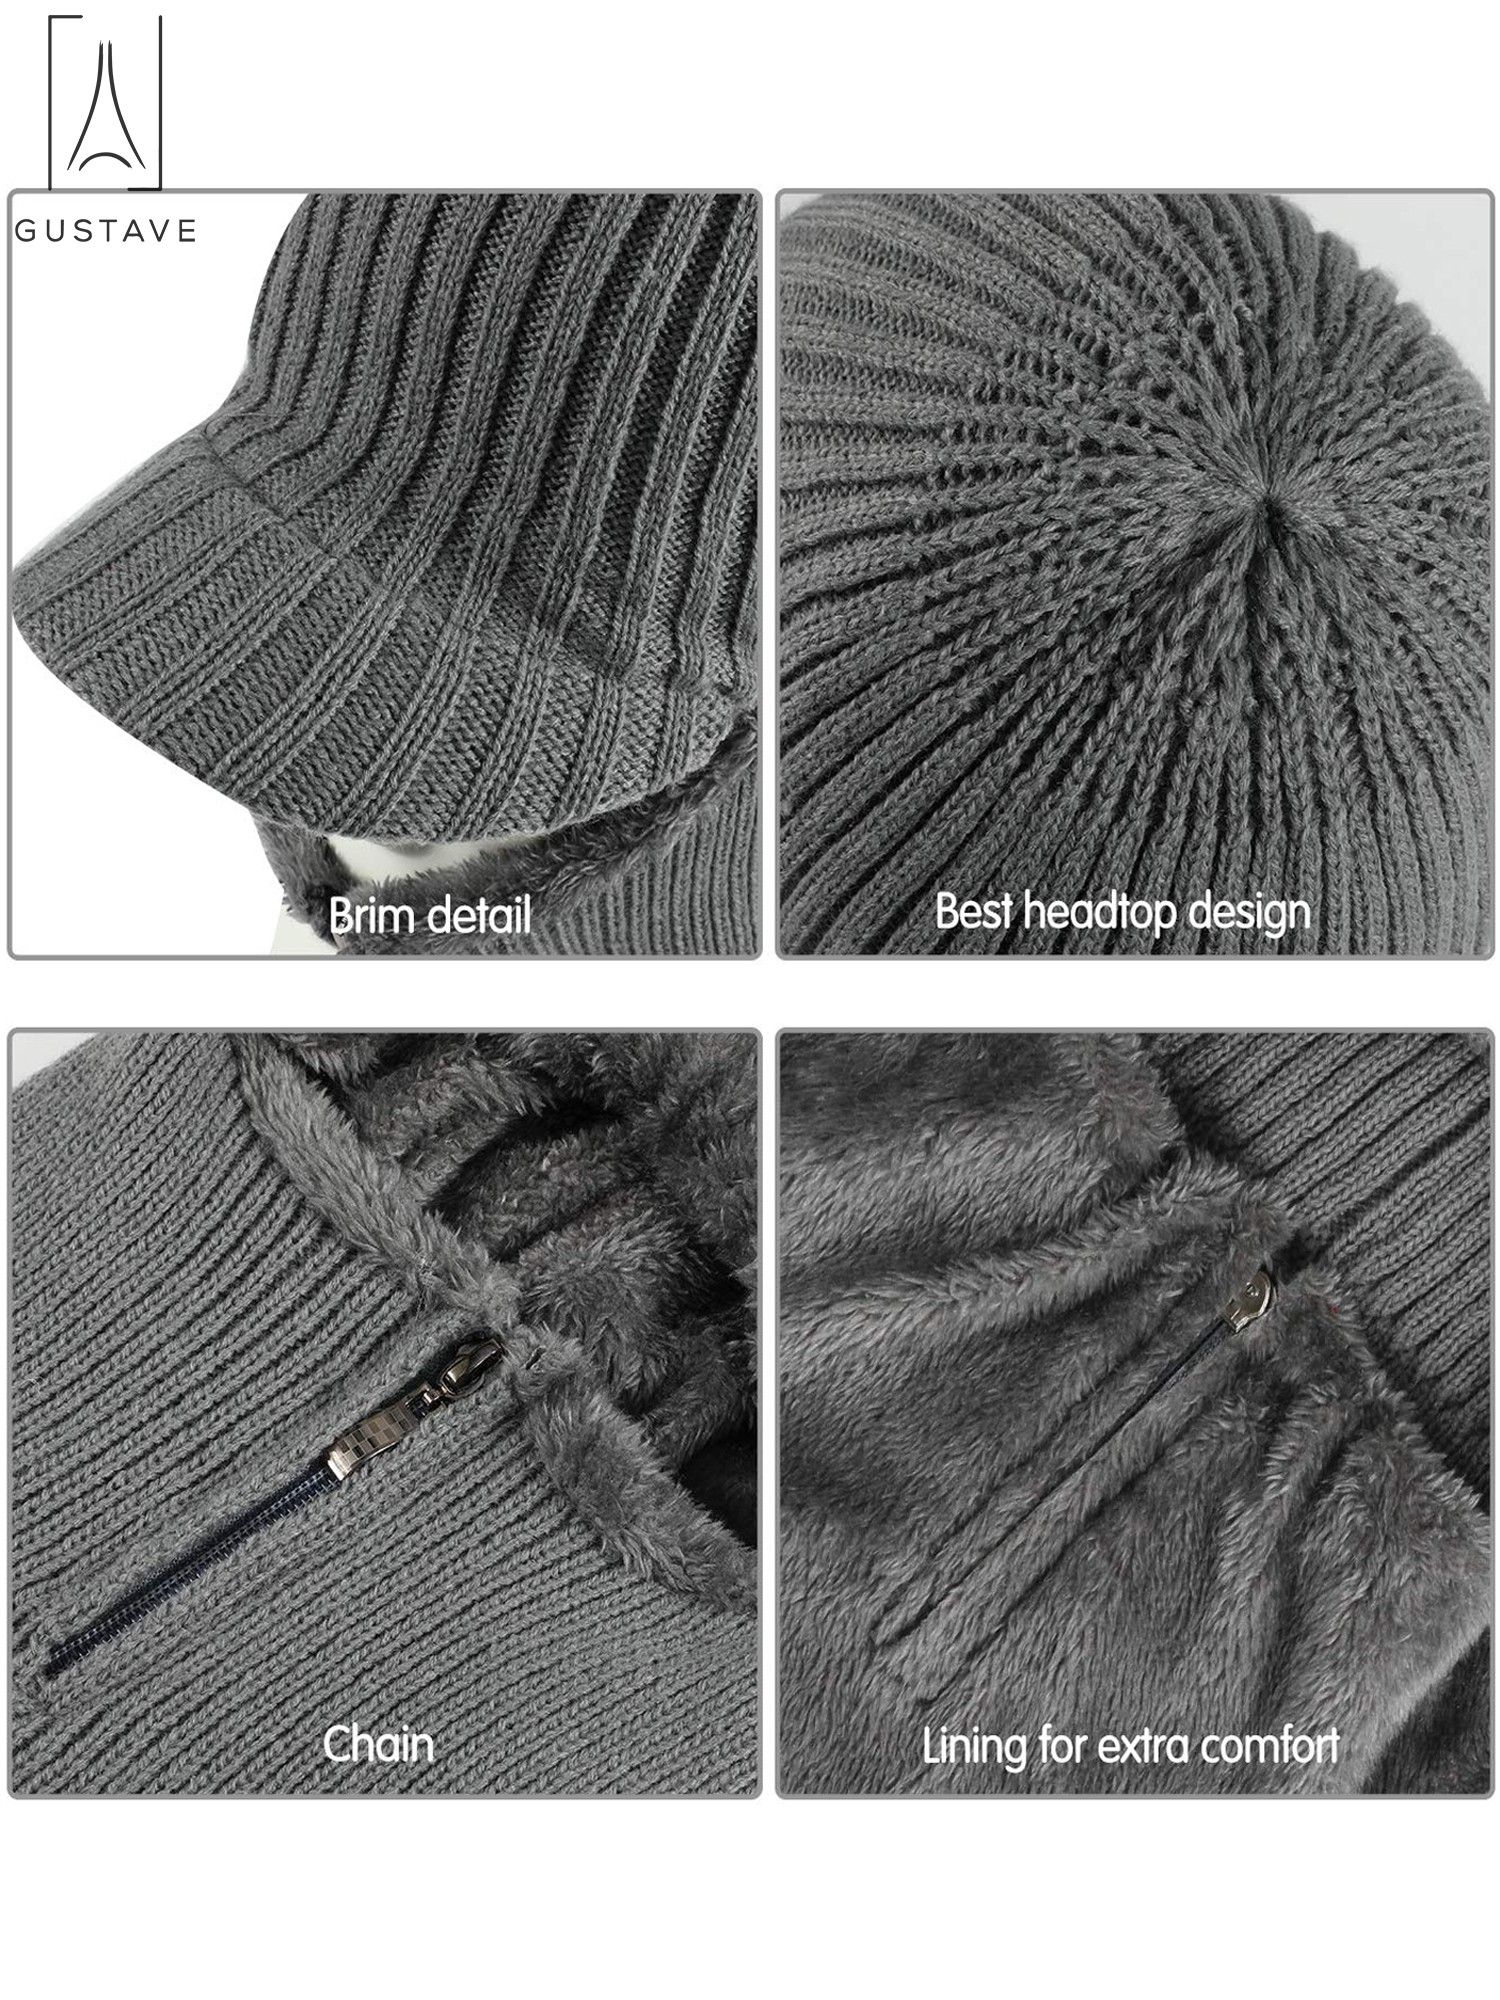 Gustave 2 In 1 Men Winter Warm Balaclava Beanie Hat with Fleece Lining Zipper Neck Scarf Warmer Ear Protector Knitting Stripes Hat and Scarf Conjoined Set "Gray" - image 4 of 9